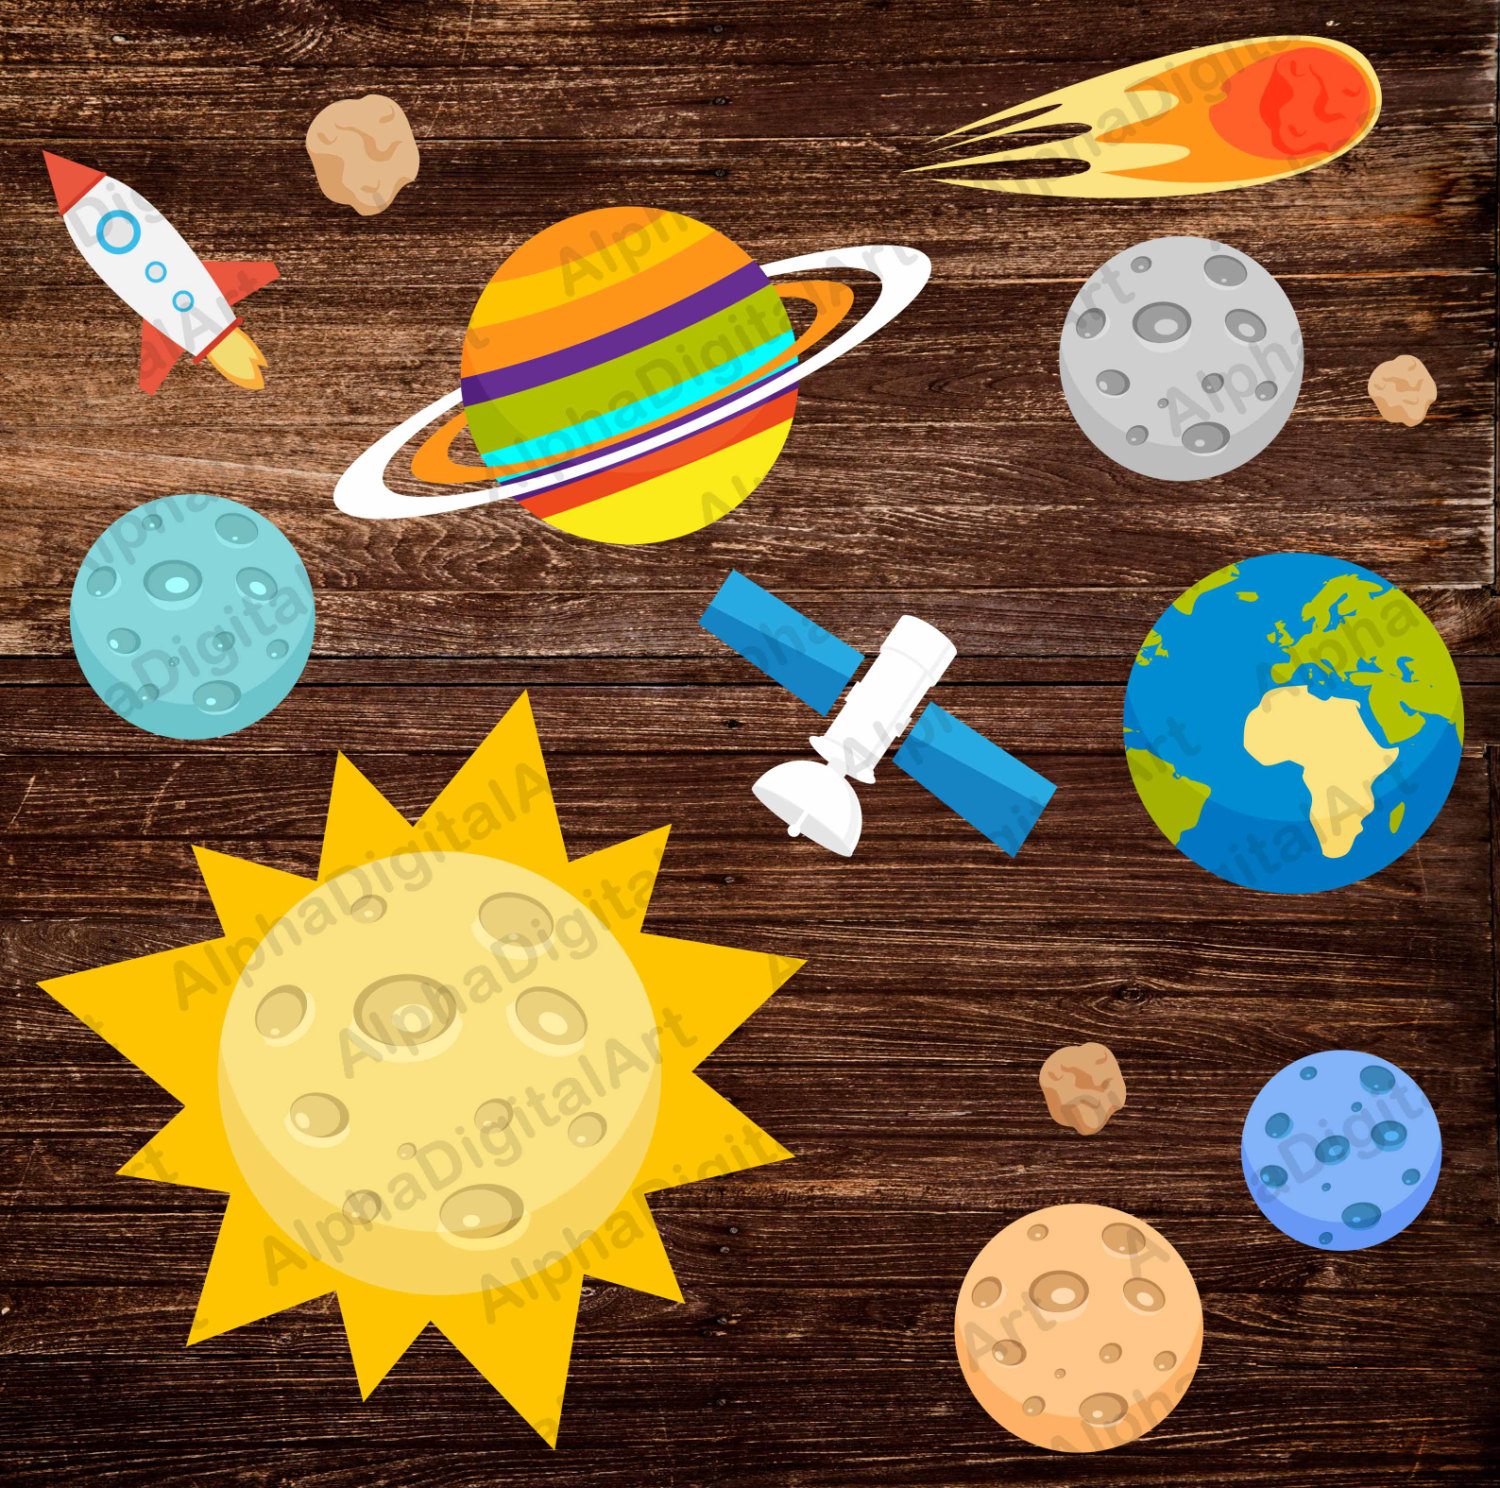 asteroid clipart brown